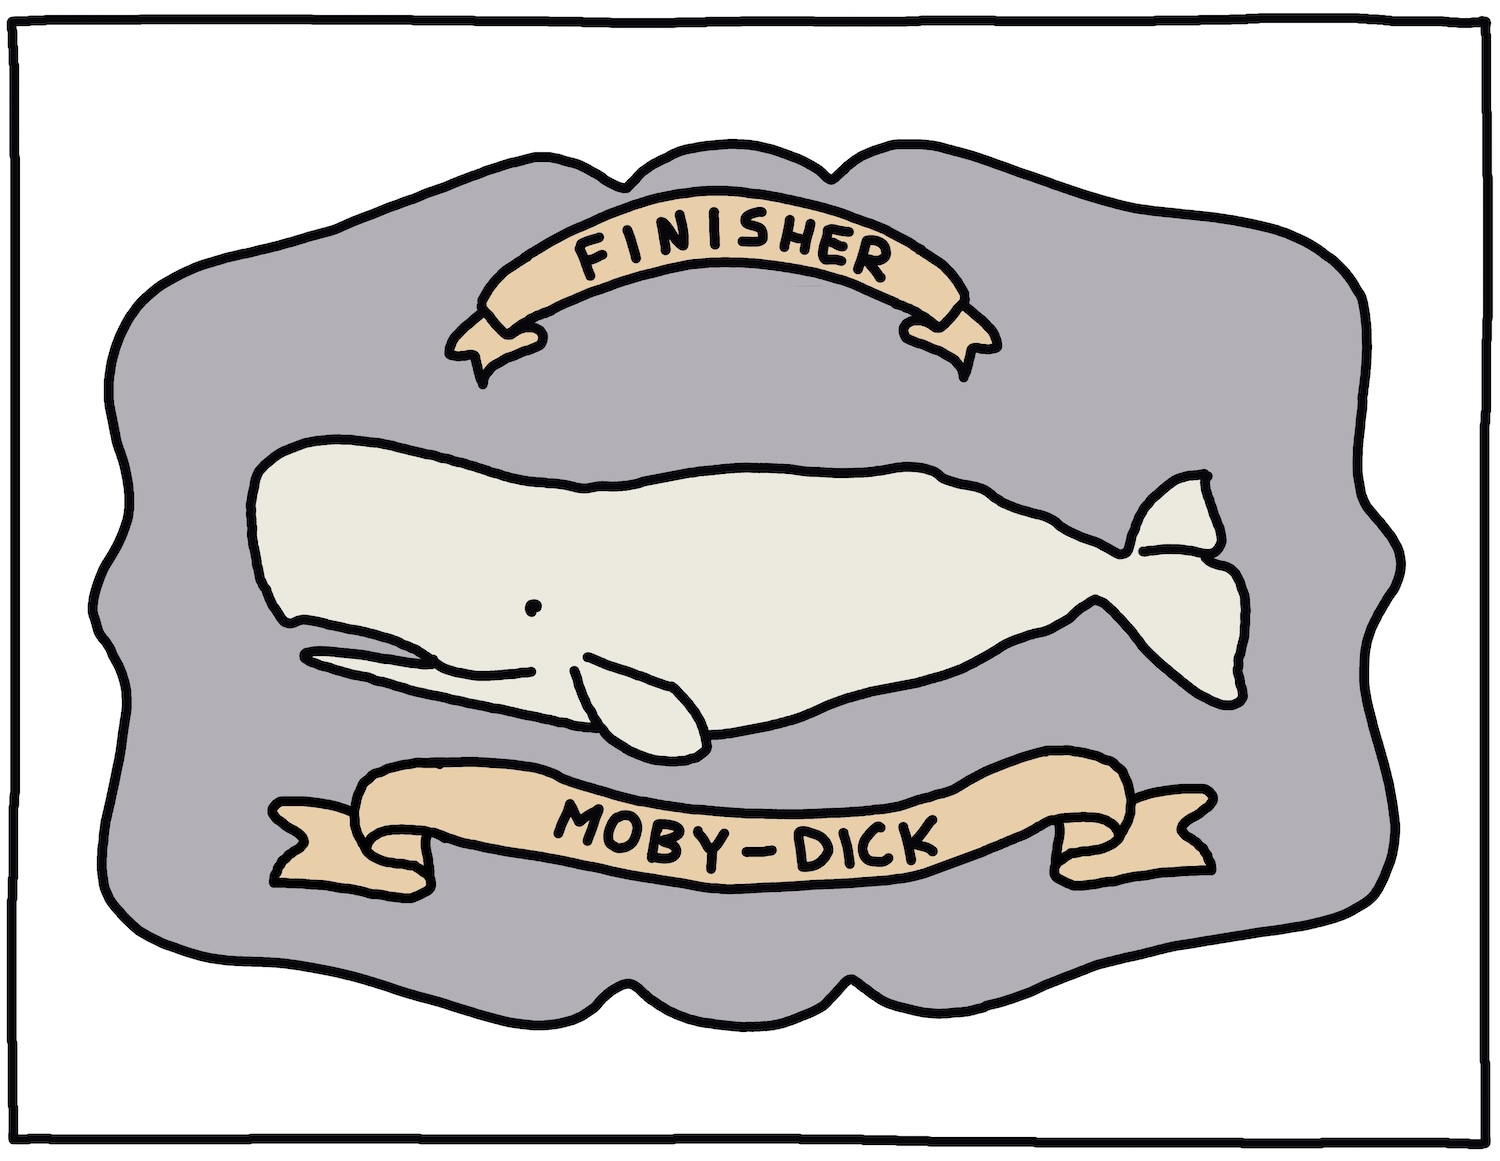 Moby Dick Finisher Belt Buckle